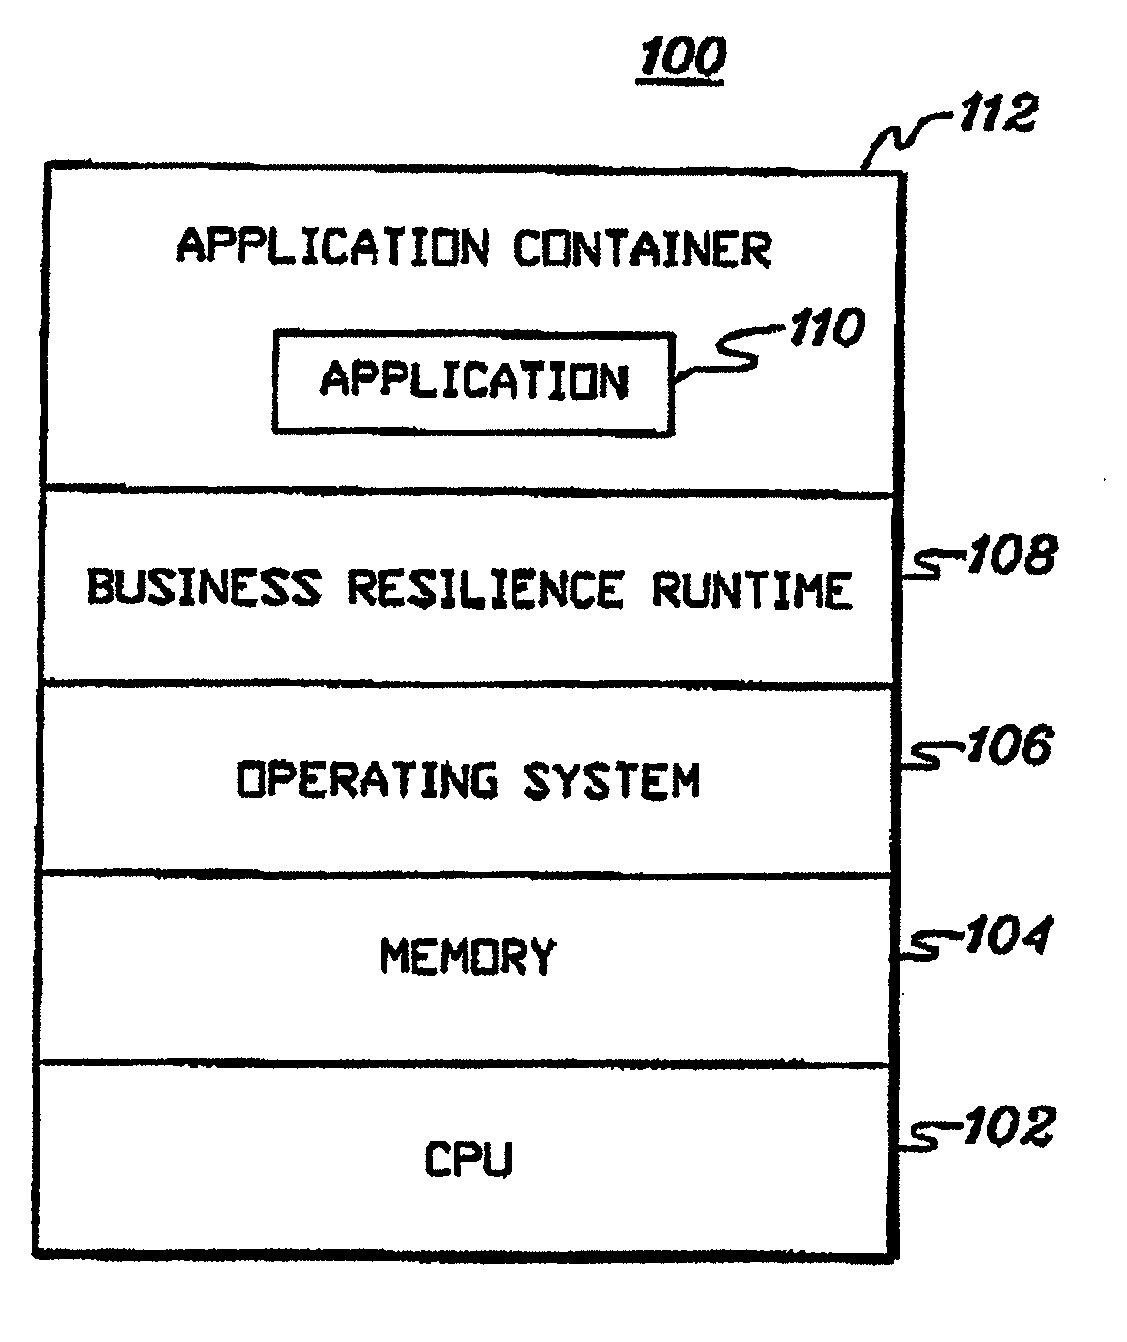 Adaptive business resiliency computer system for information technology environments